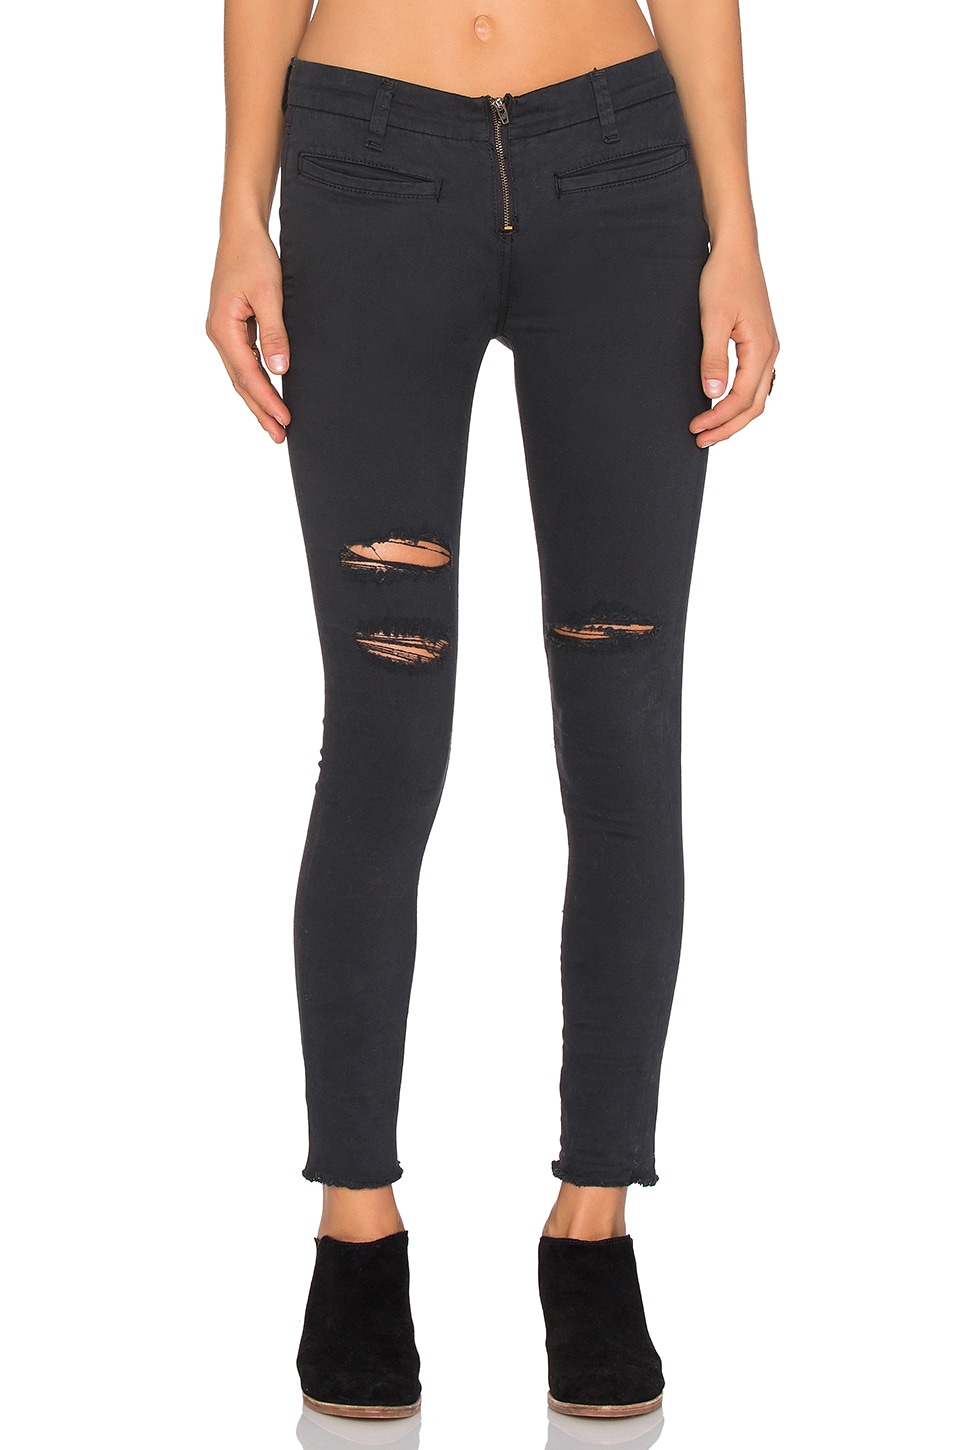 Charcoal Amuse Society Womens Iconic Skinny Jeans